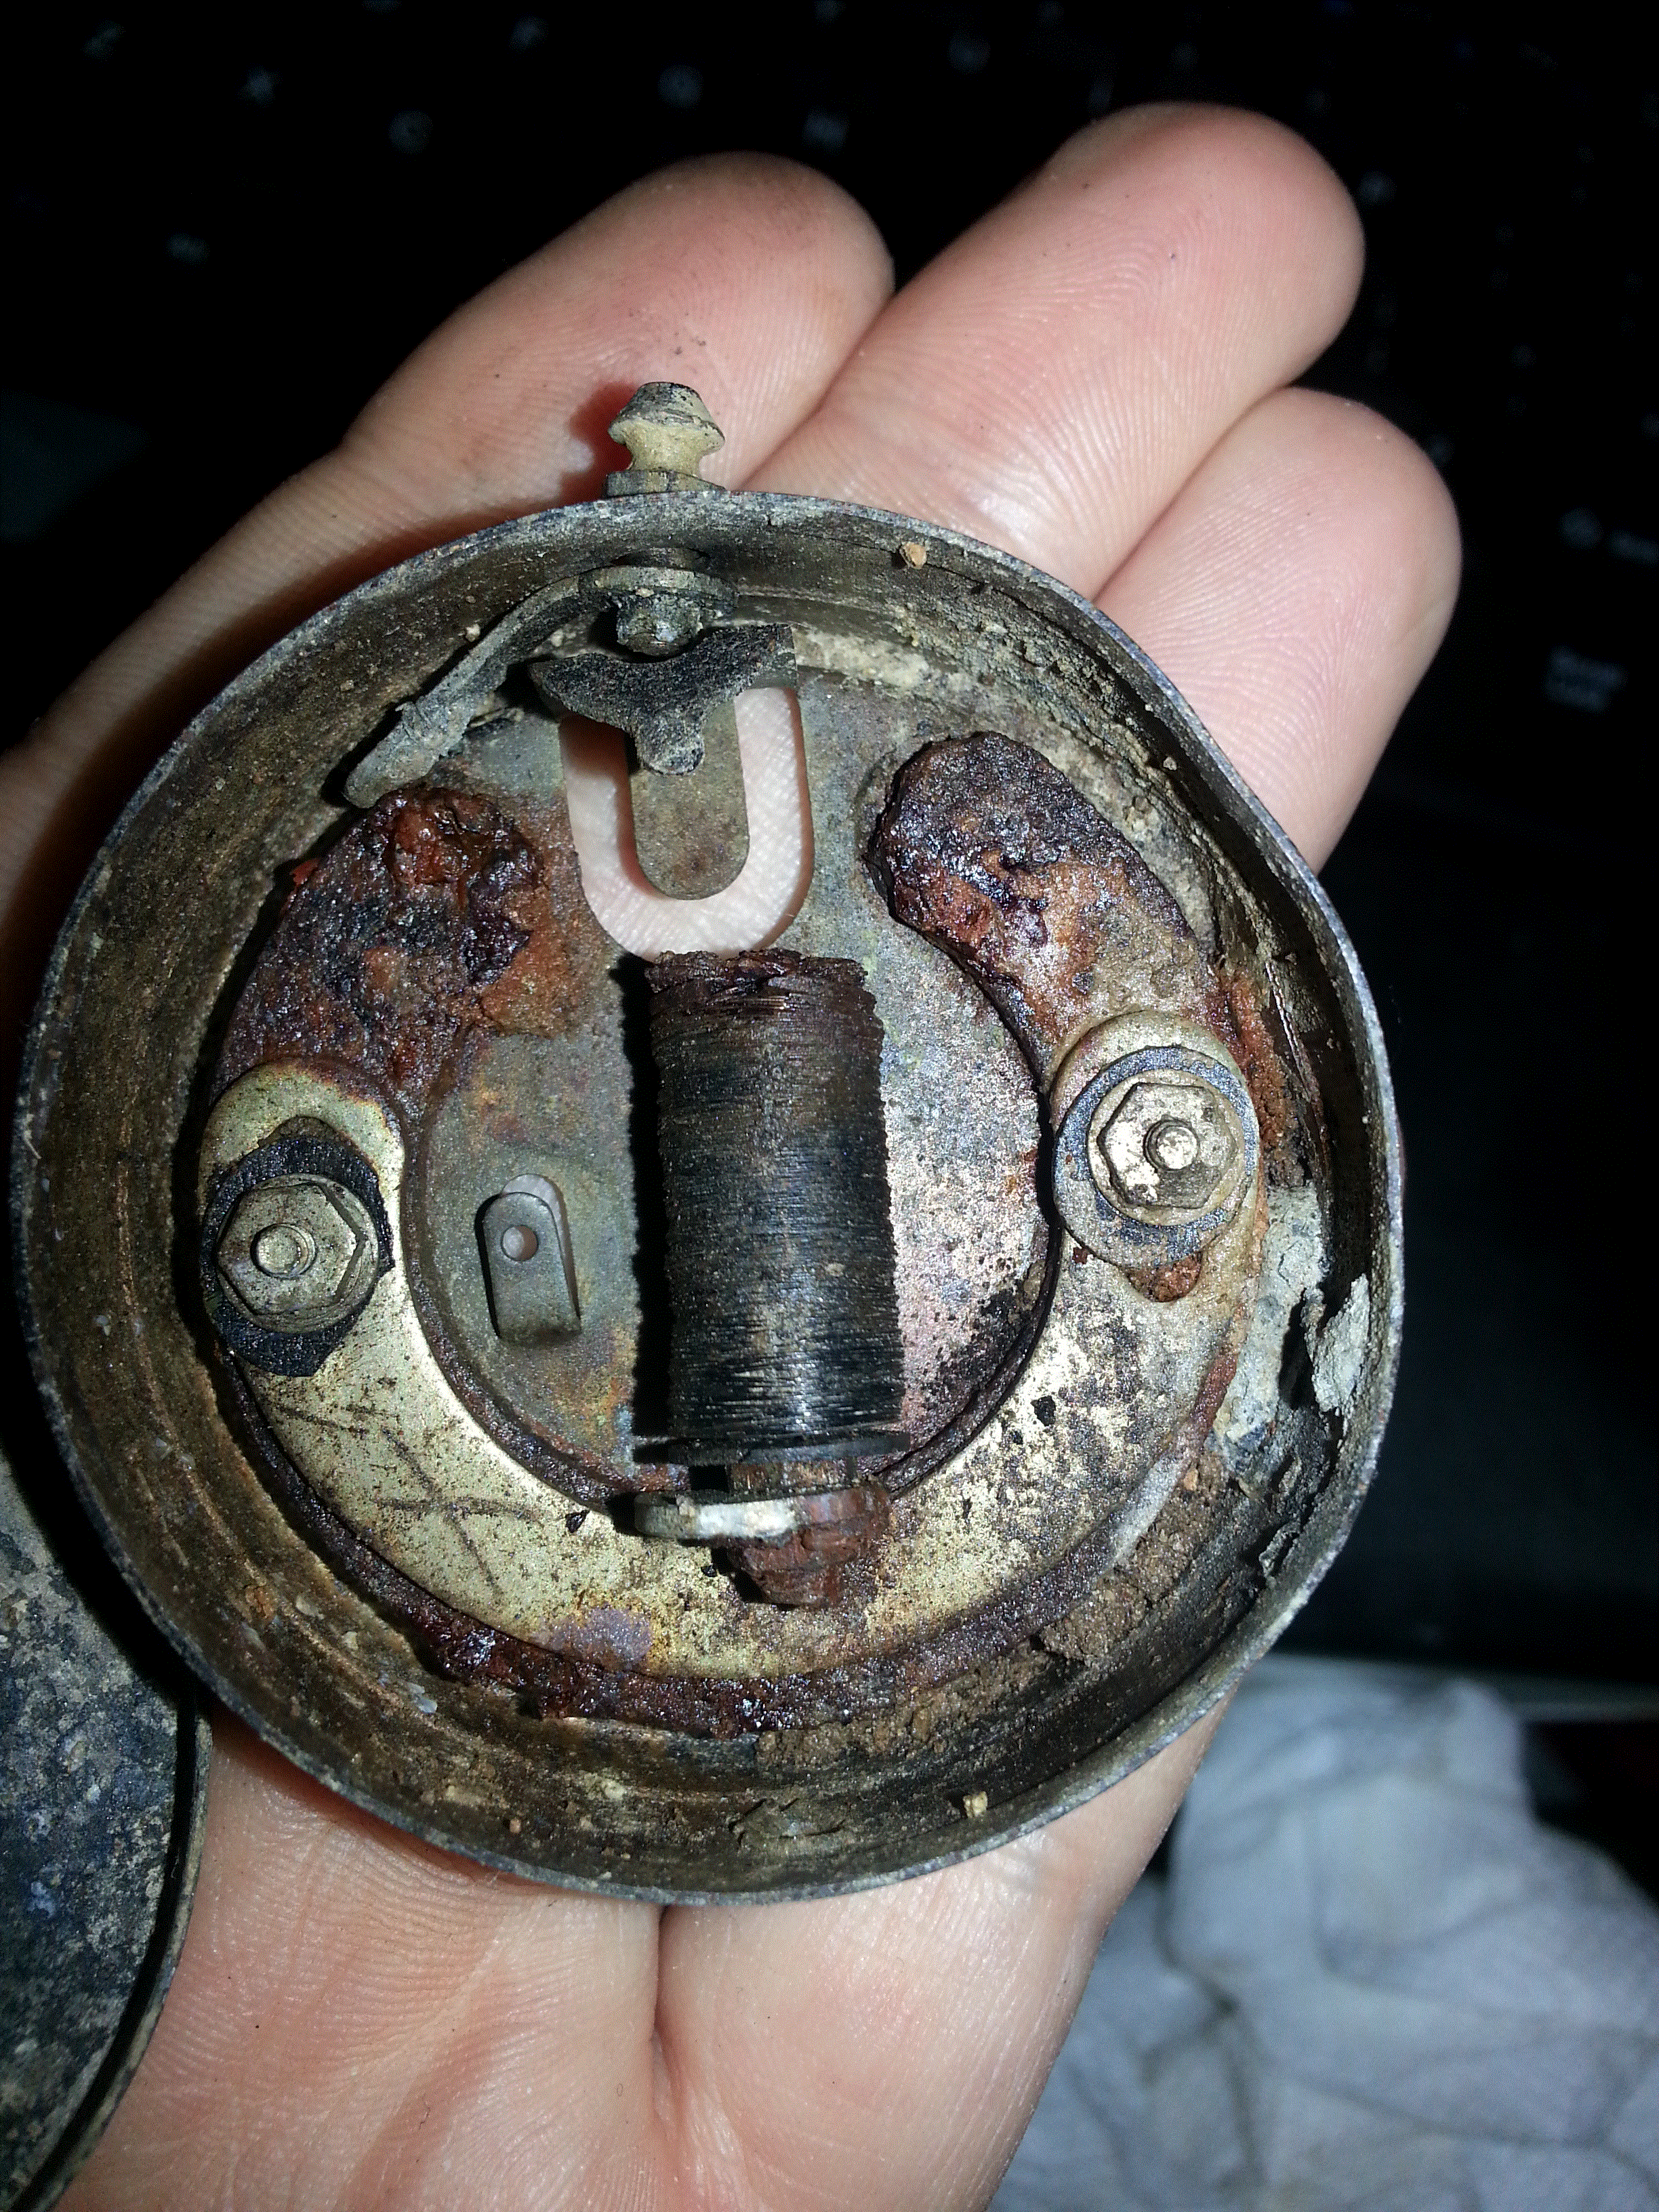 inside of what I believe is an old voltage meter